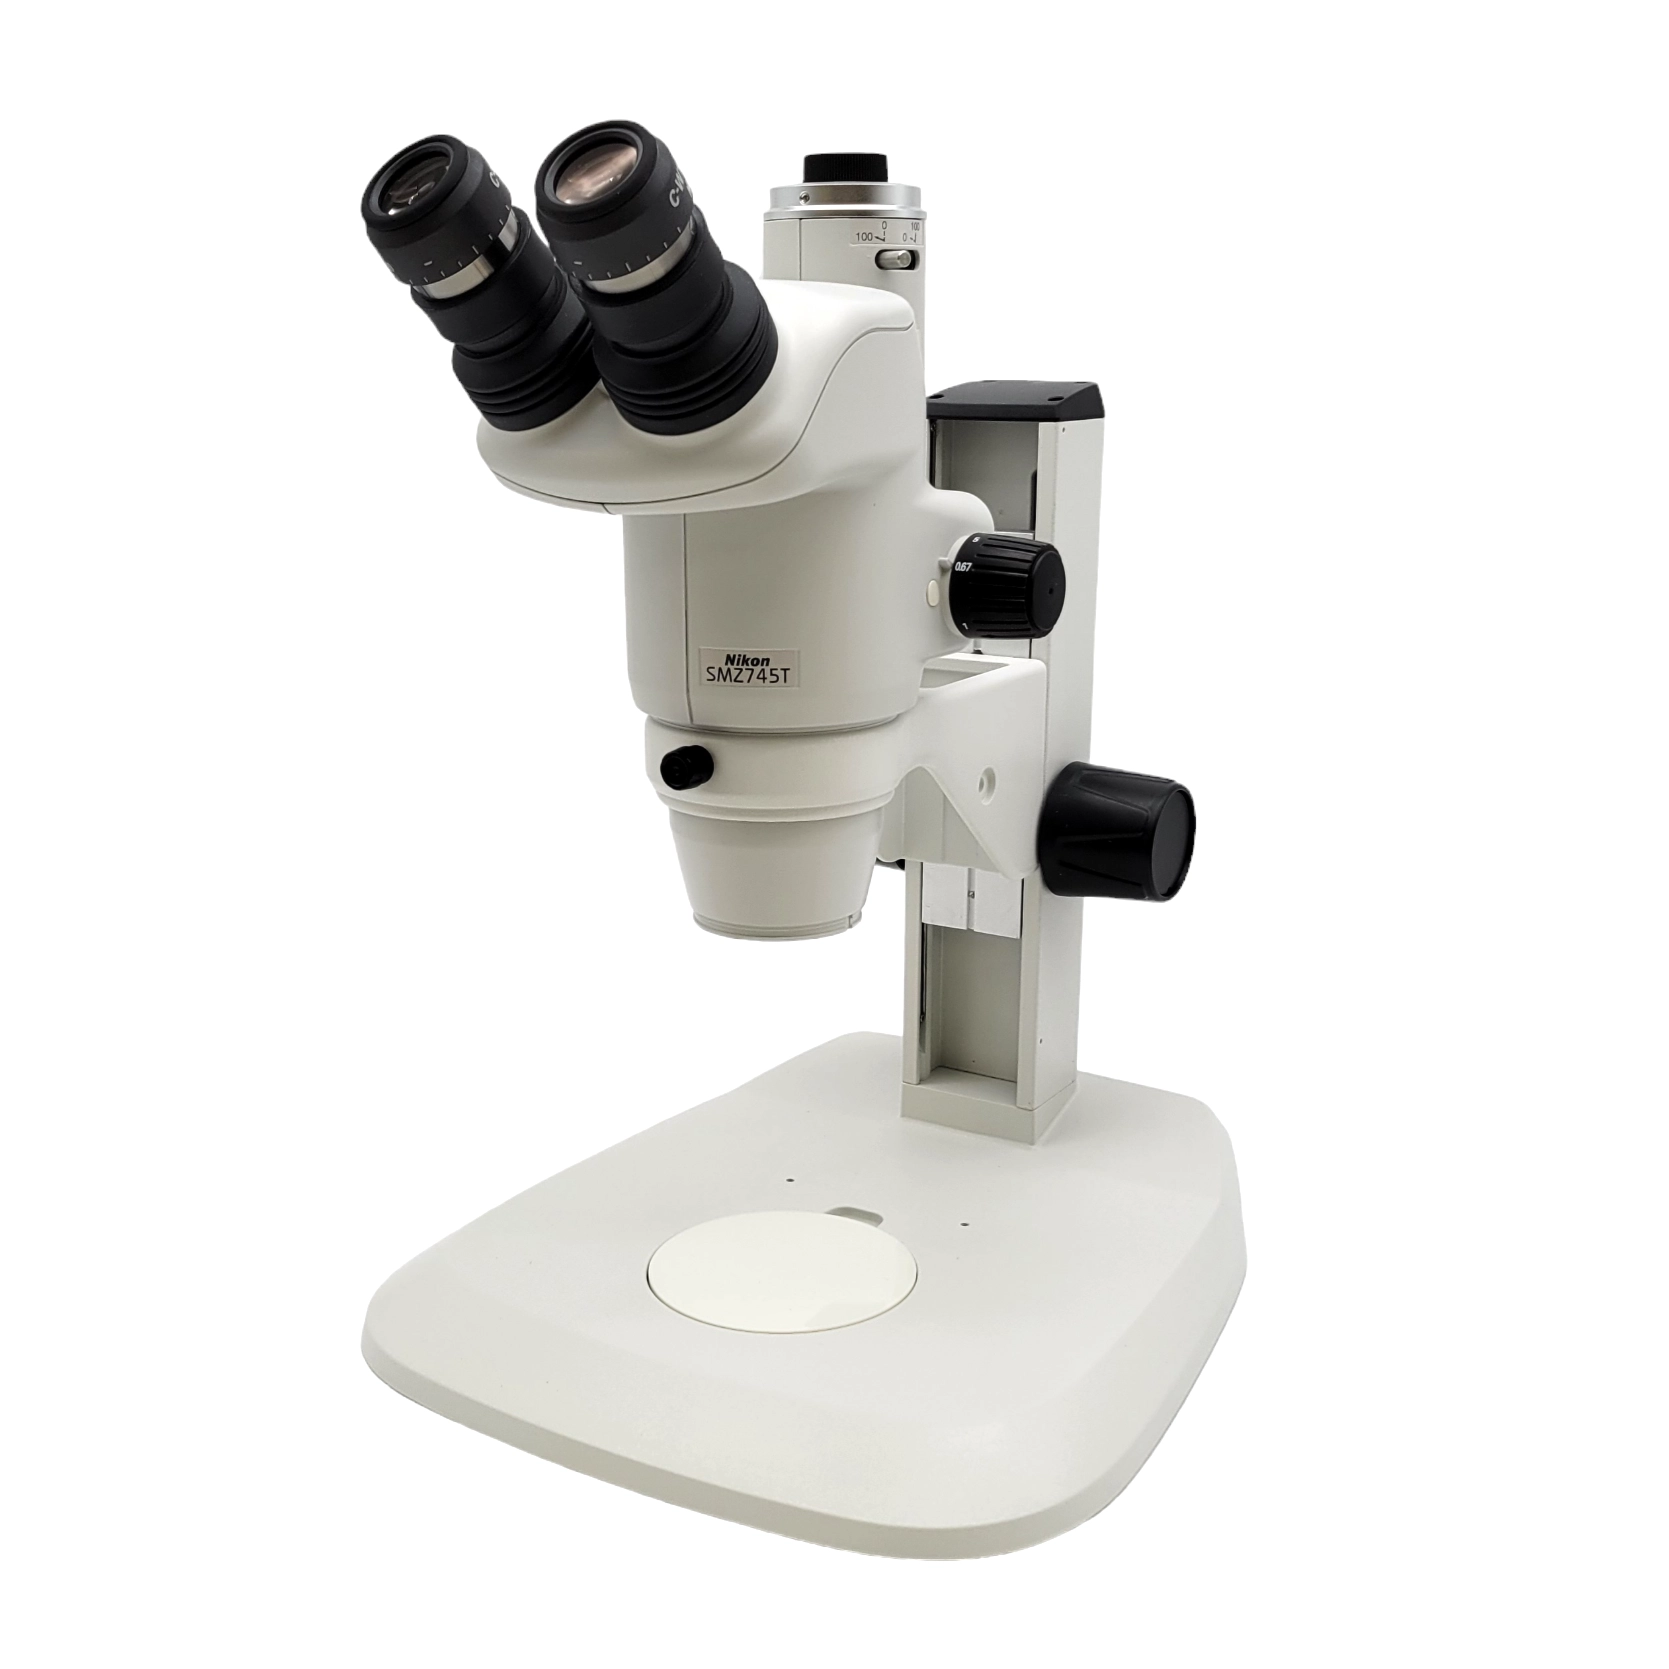 Nikon SMZ745 Inspection Microscope with Large Base Stand